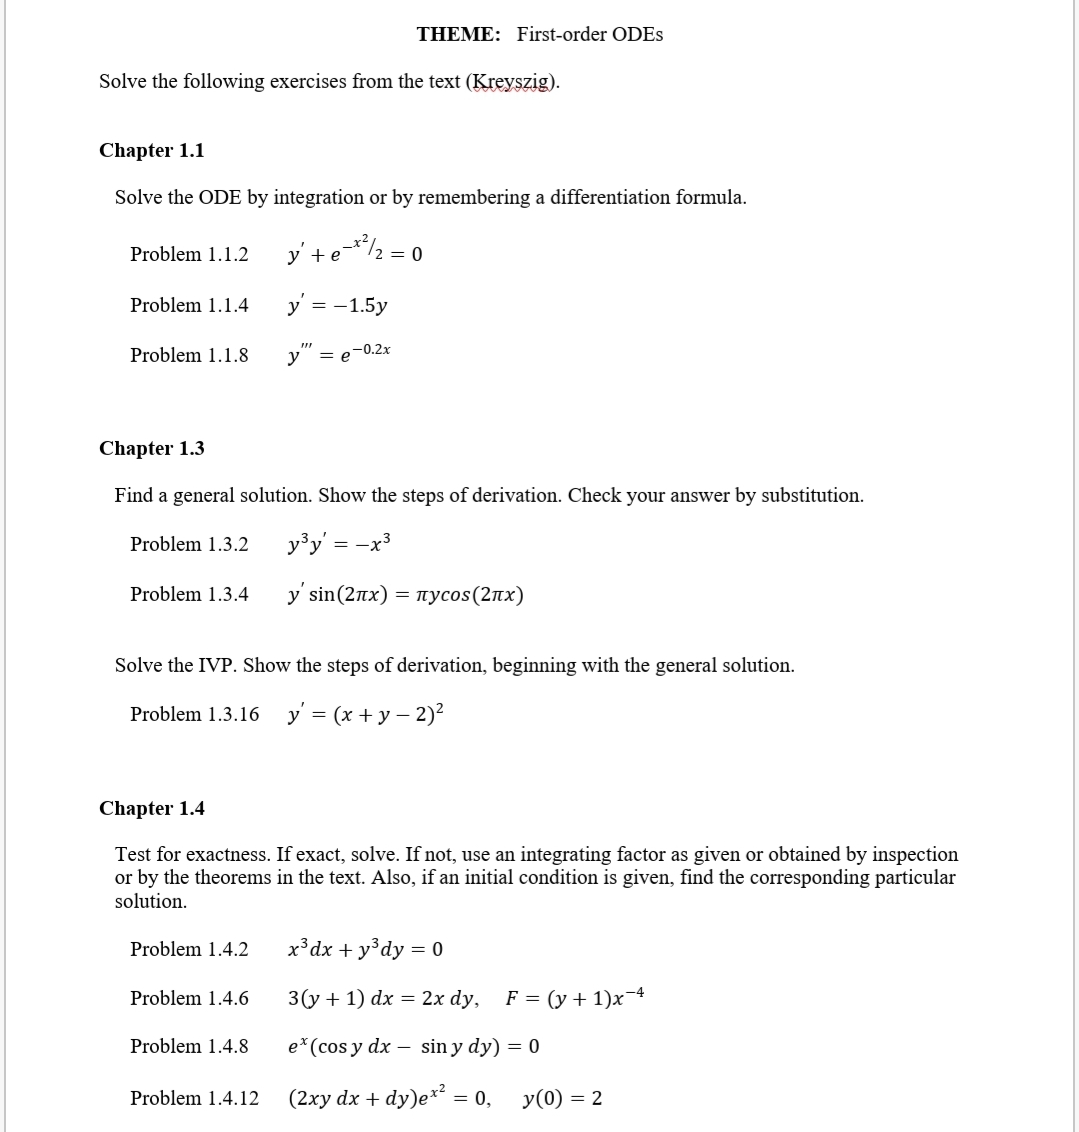 THEME: First-order ODES
Solve the following exercises from the text (Kreyszig).
Chapter 1.1
Solve the ODE by integration or by remembering a differentiation formula.
y' +e*/2 = 0
Problem 1.1.2
Problem 1.1.4
y = -1.5y
y" =
Problem 1.1.8
-0.2x
Chapter 1.3
Find a general solution. Show the steps of derivation. Check your answer by substitution.
Problem 1.3.2
y³y' = -x3
Problem 1.3.4
y sin (2πx)
- πycos (2 πx)
Solve the IVP. Show the steps of derivation, beginning with the general solution.
Problem 1.3.16 y' = (x + y – 2)²
Chapter 1.4
Test for exactness. If exact, solve. If not, use an integrating factor as given or obtained by inspection
or by the theorems in the text. Also, if an initial condition is given, find the corresponding particular
solution.
Problem 1.4.2
x³dx + y°dy = 0
Problem 1.4.6
3(у + 1) dx %3D 2x dy,
F = (y + 1)x¬4
Problem 1.4.8
e*(cos y dx – sin y dy) = 0
Problem 1.4.12
(2ху dx + dy)eе** 3D 0,
y(0) = 2
